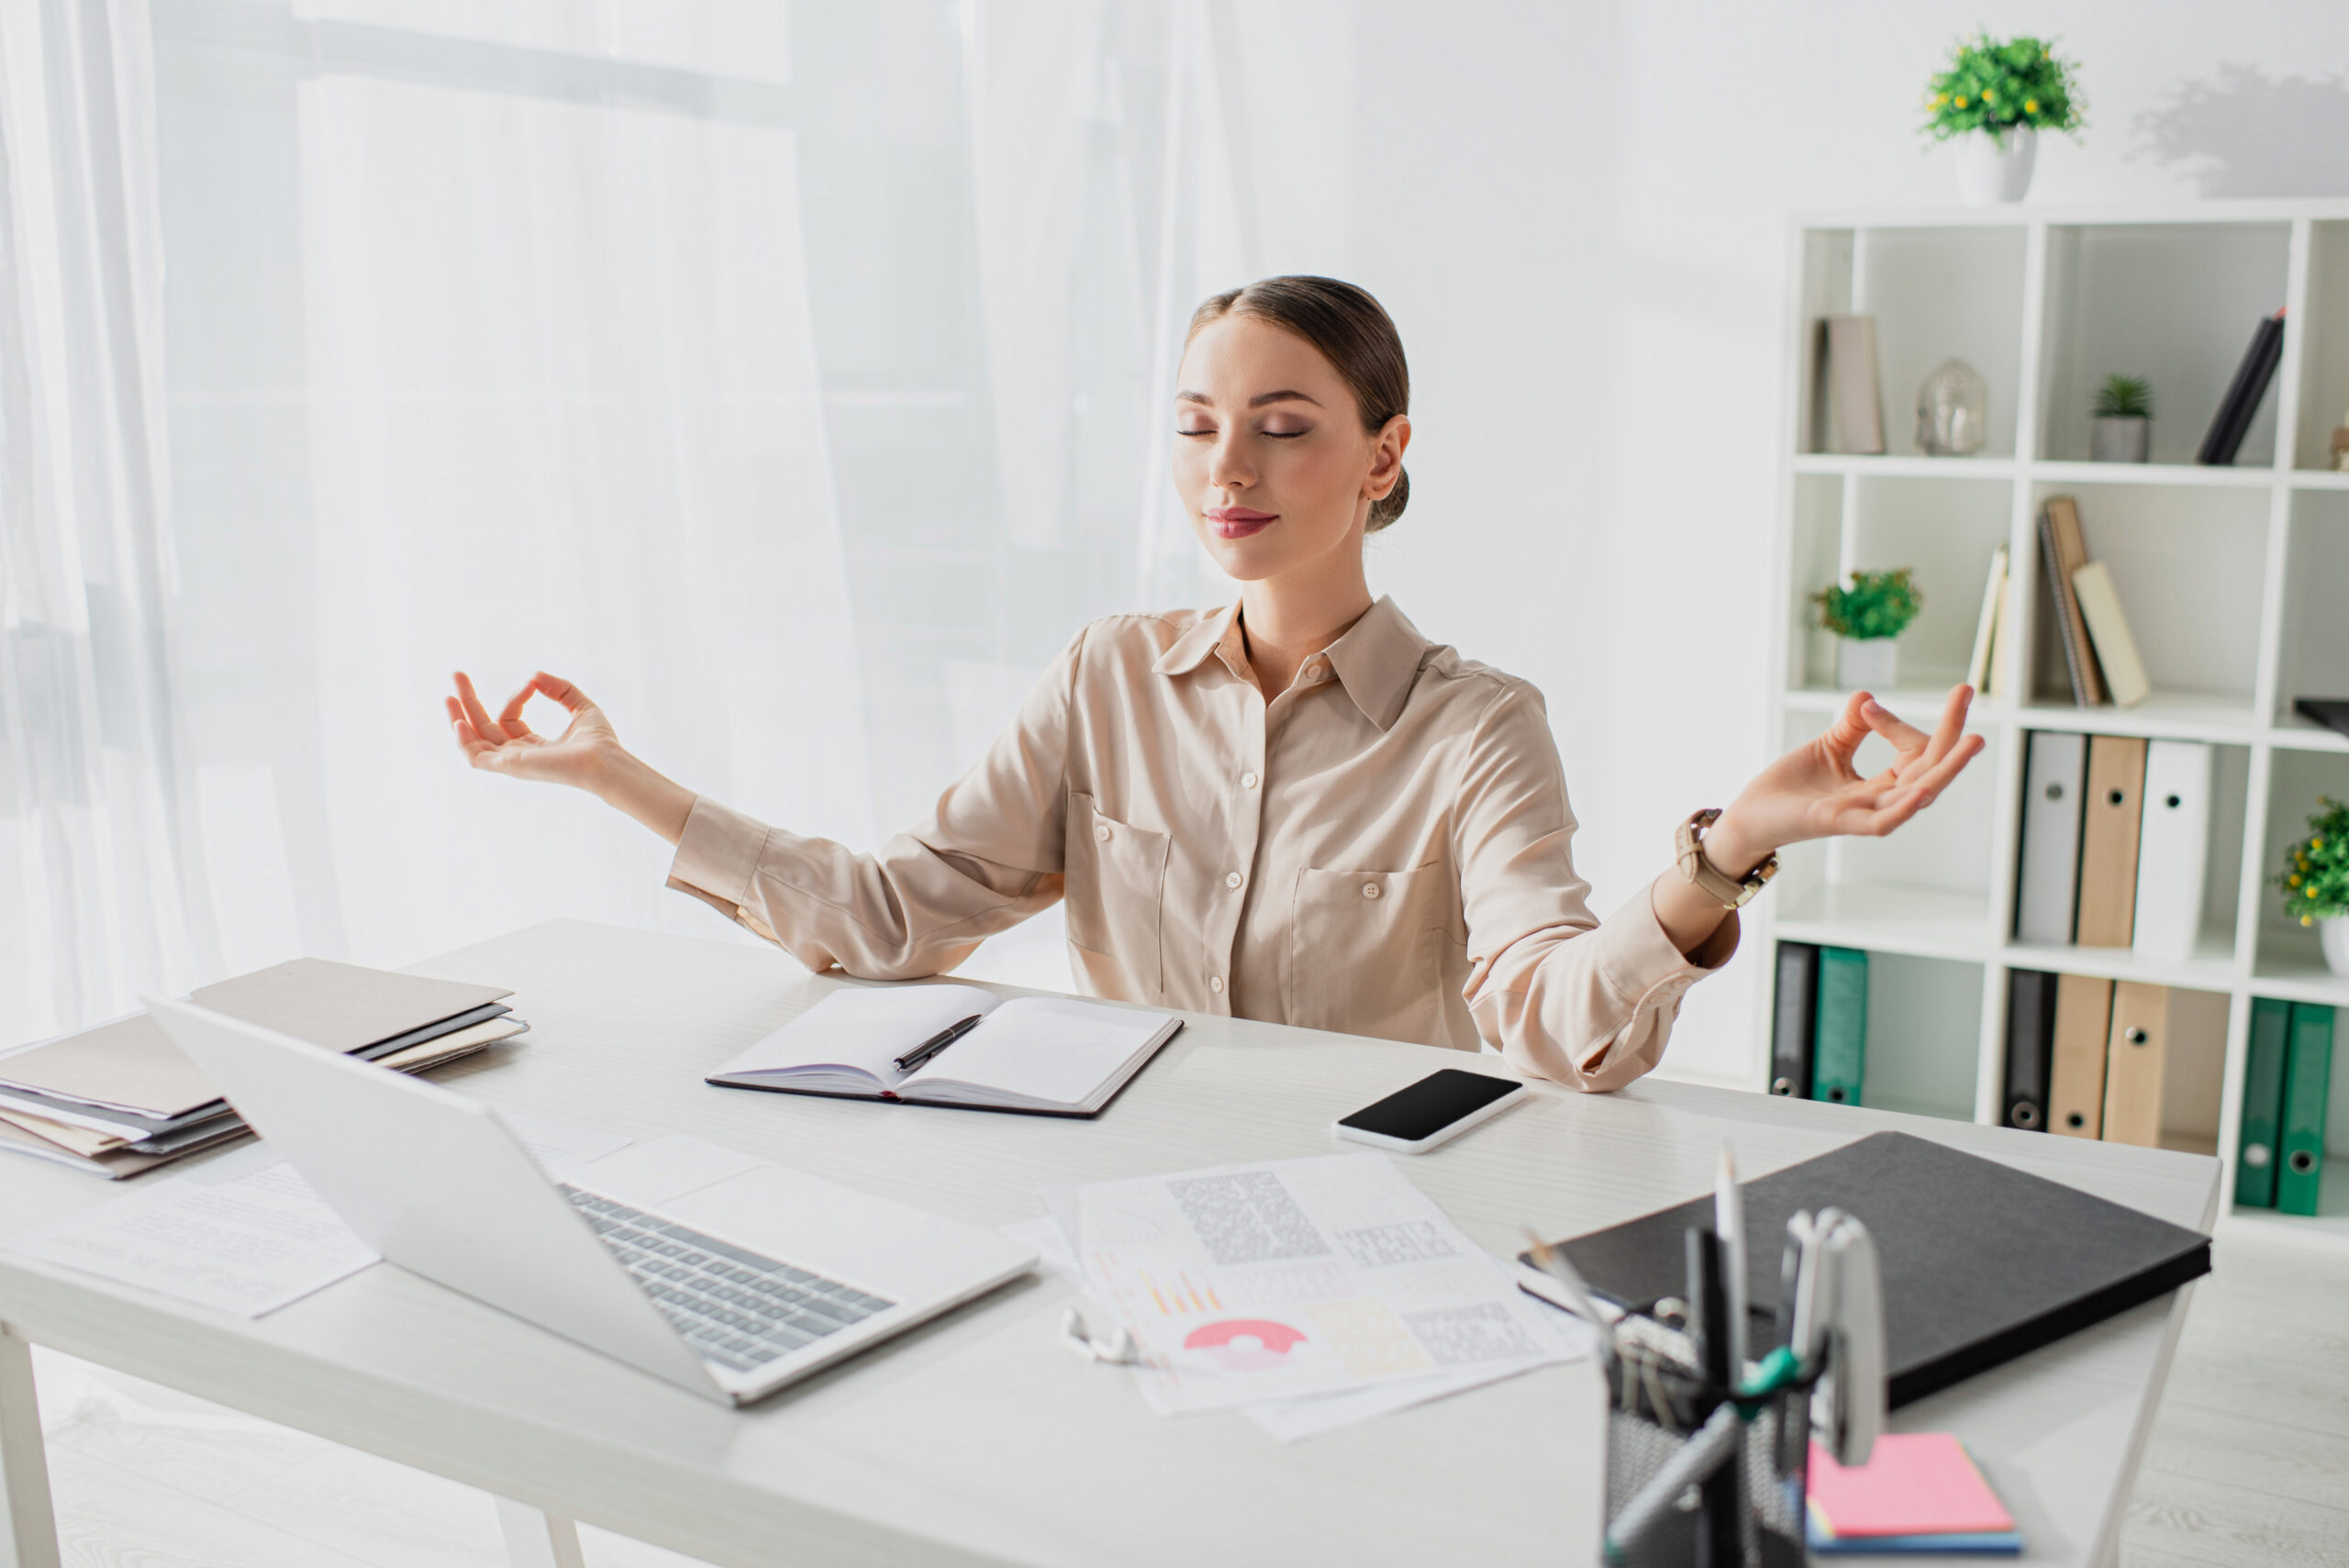 A woman practicing meditation to alleviate work-related stress in her office environment